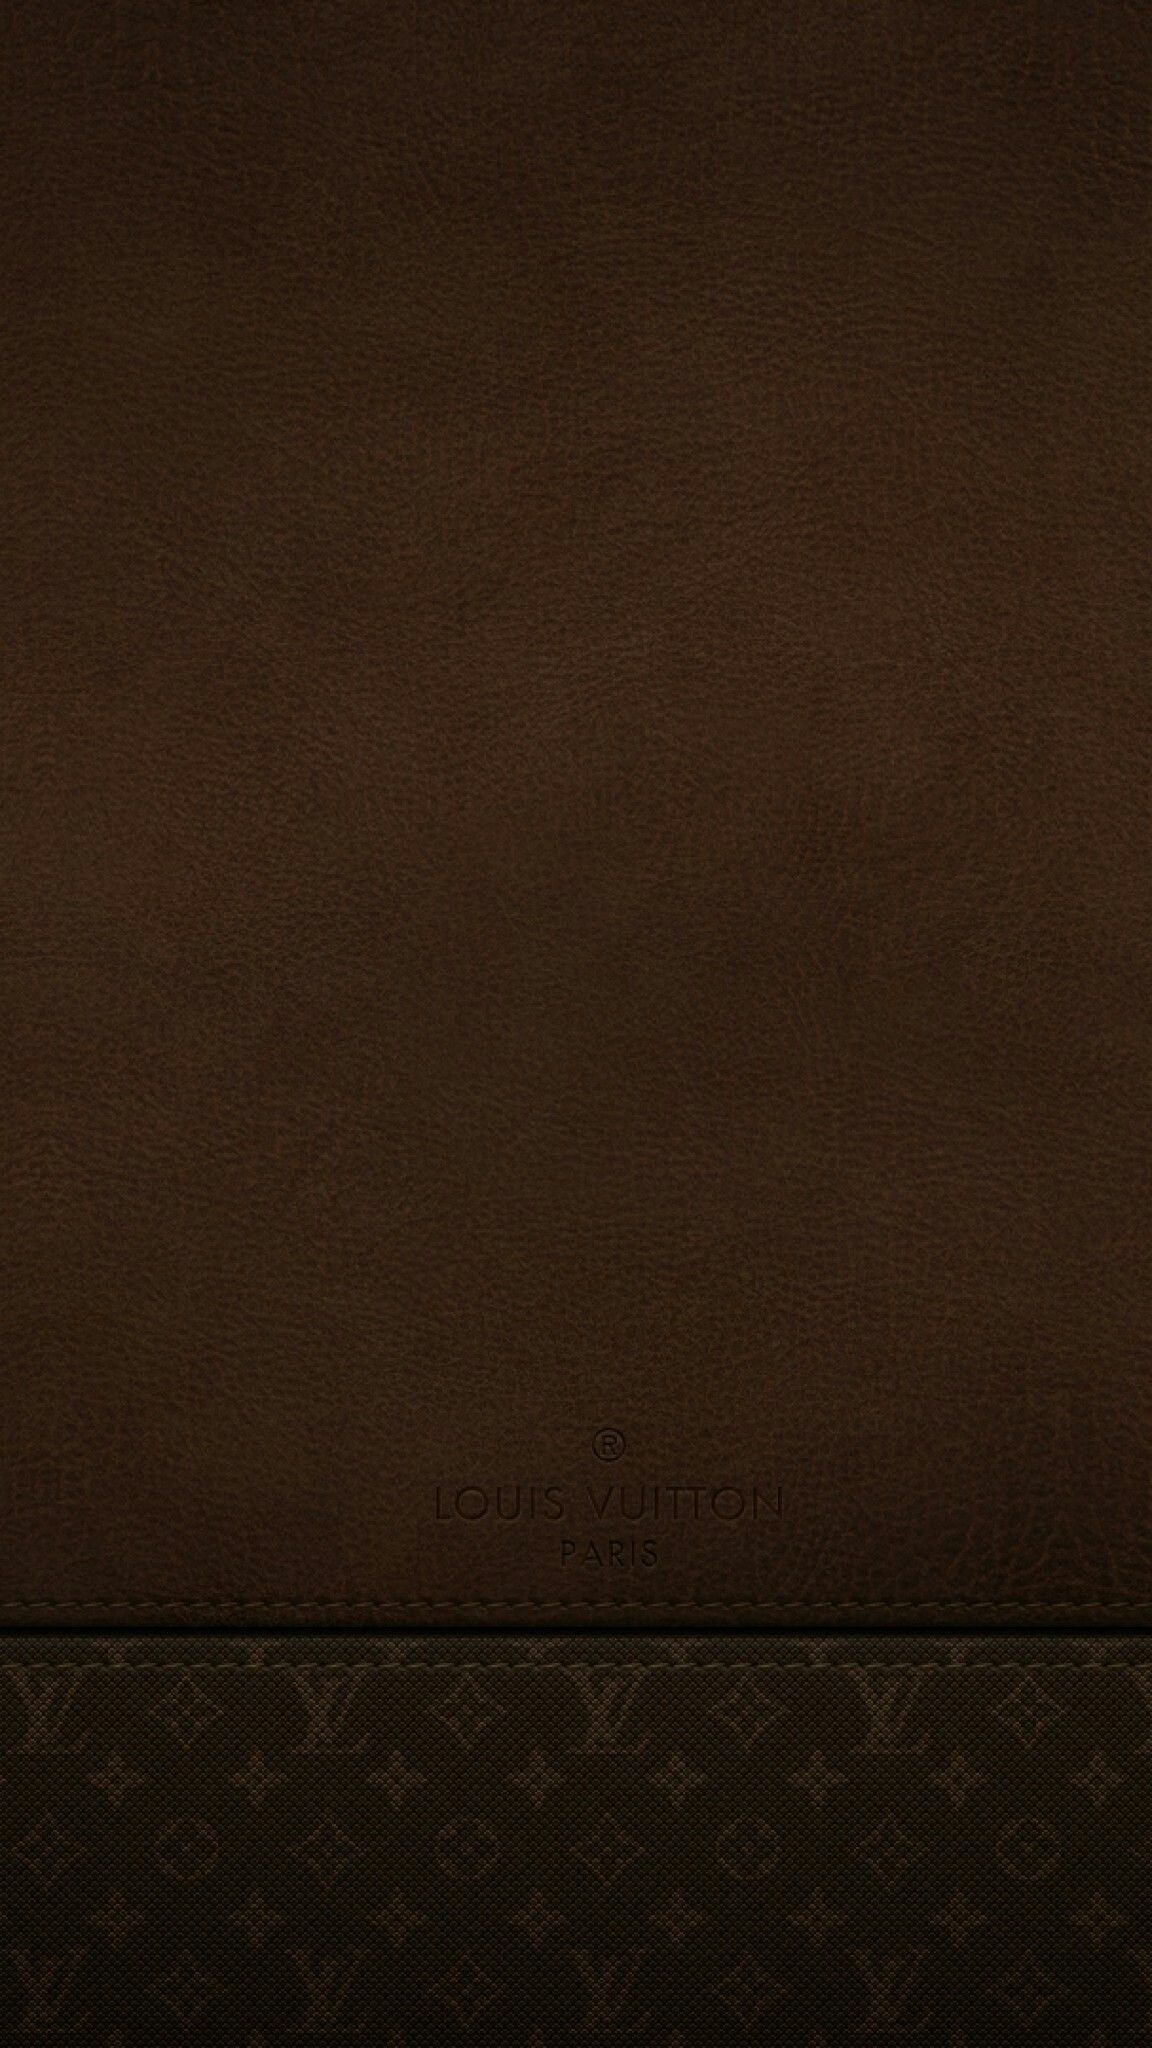 Leather Phone Wallpaper, HD Leather Phone Background on WallpaperBat